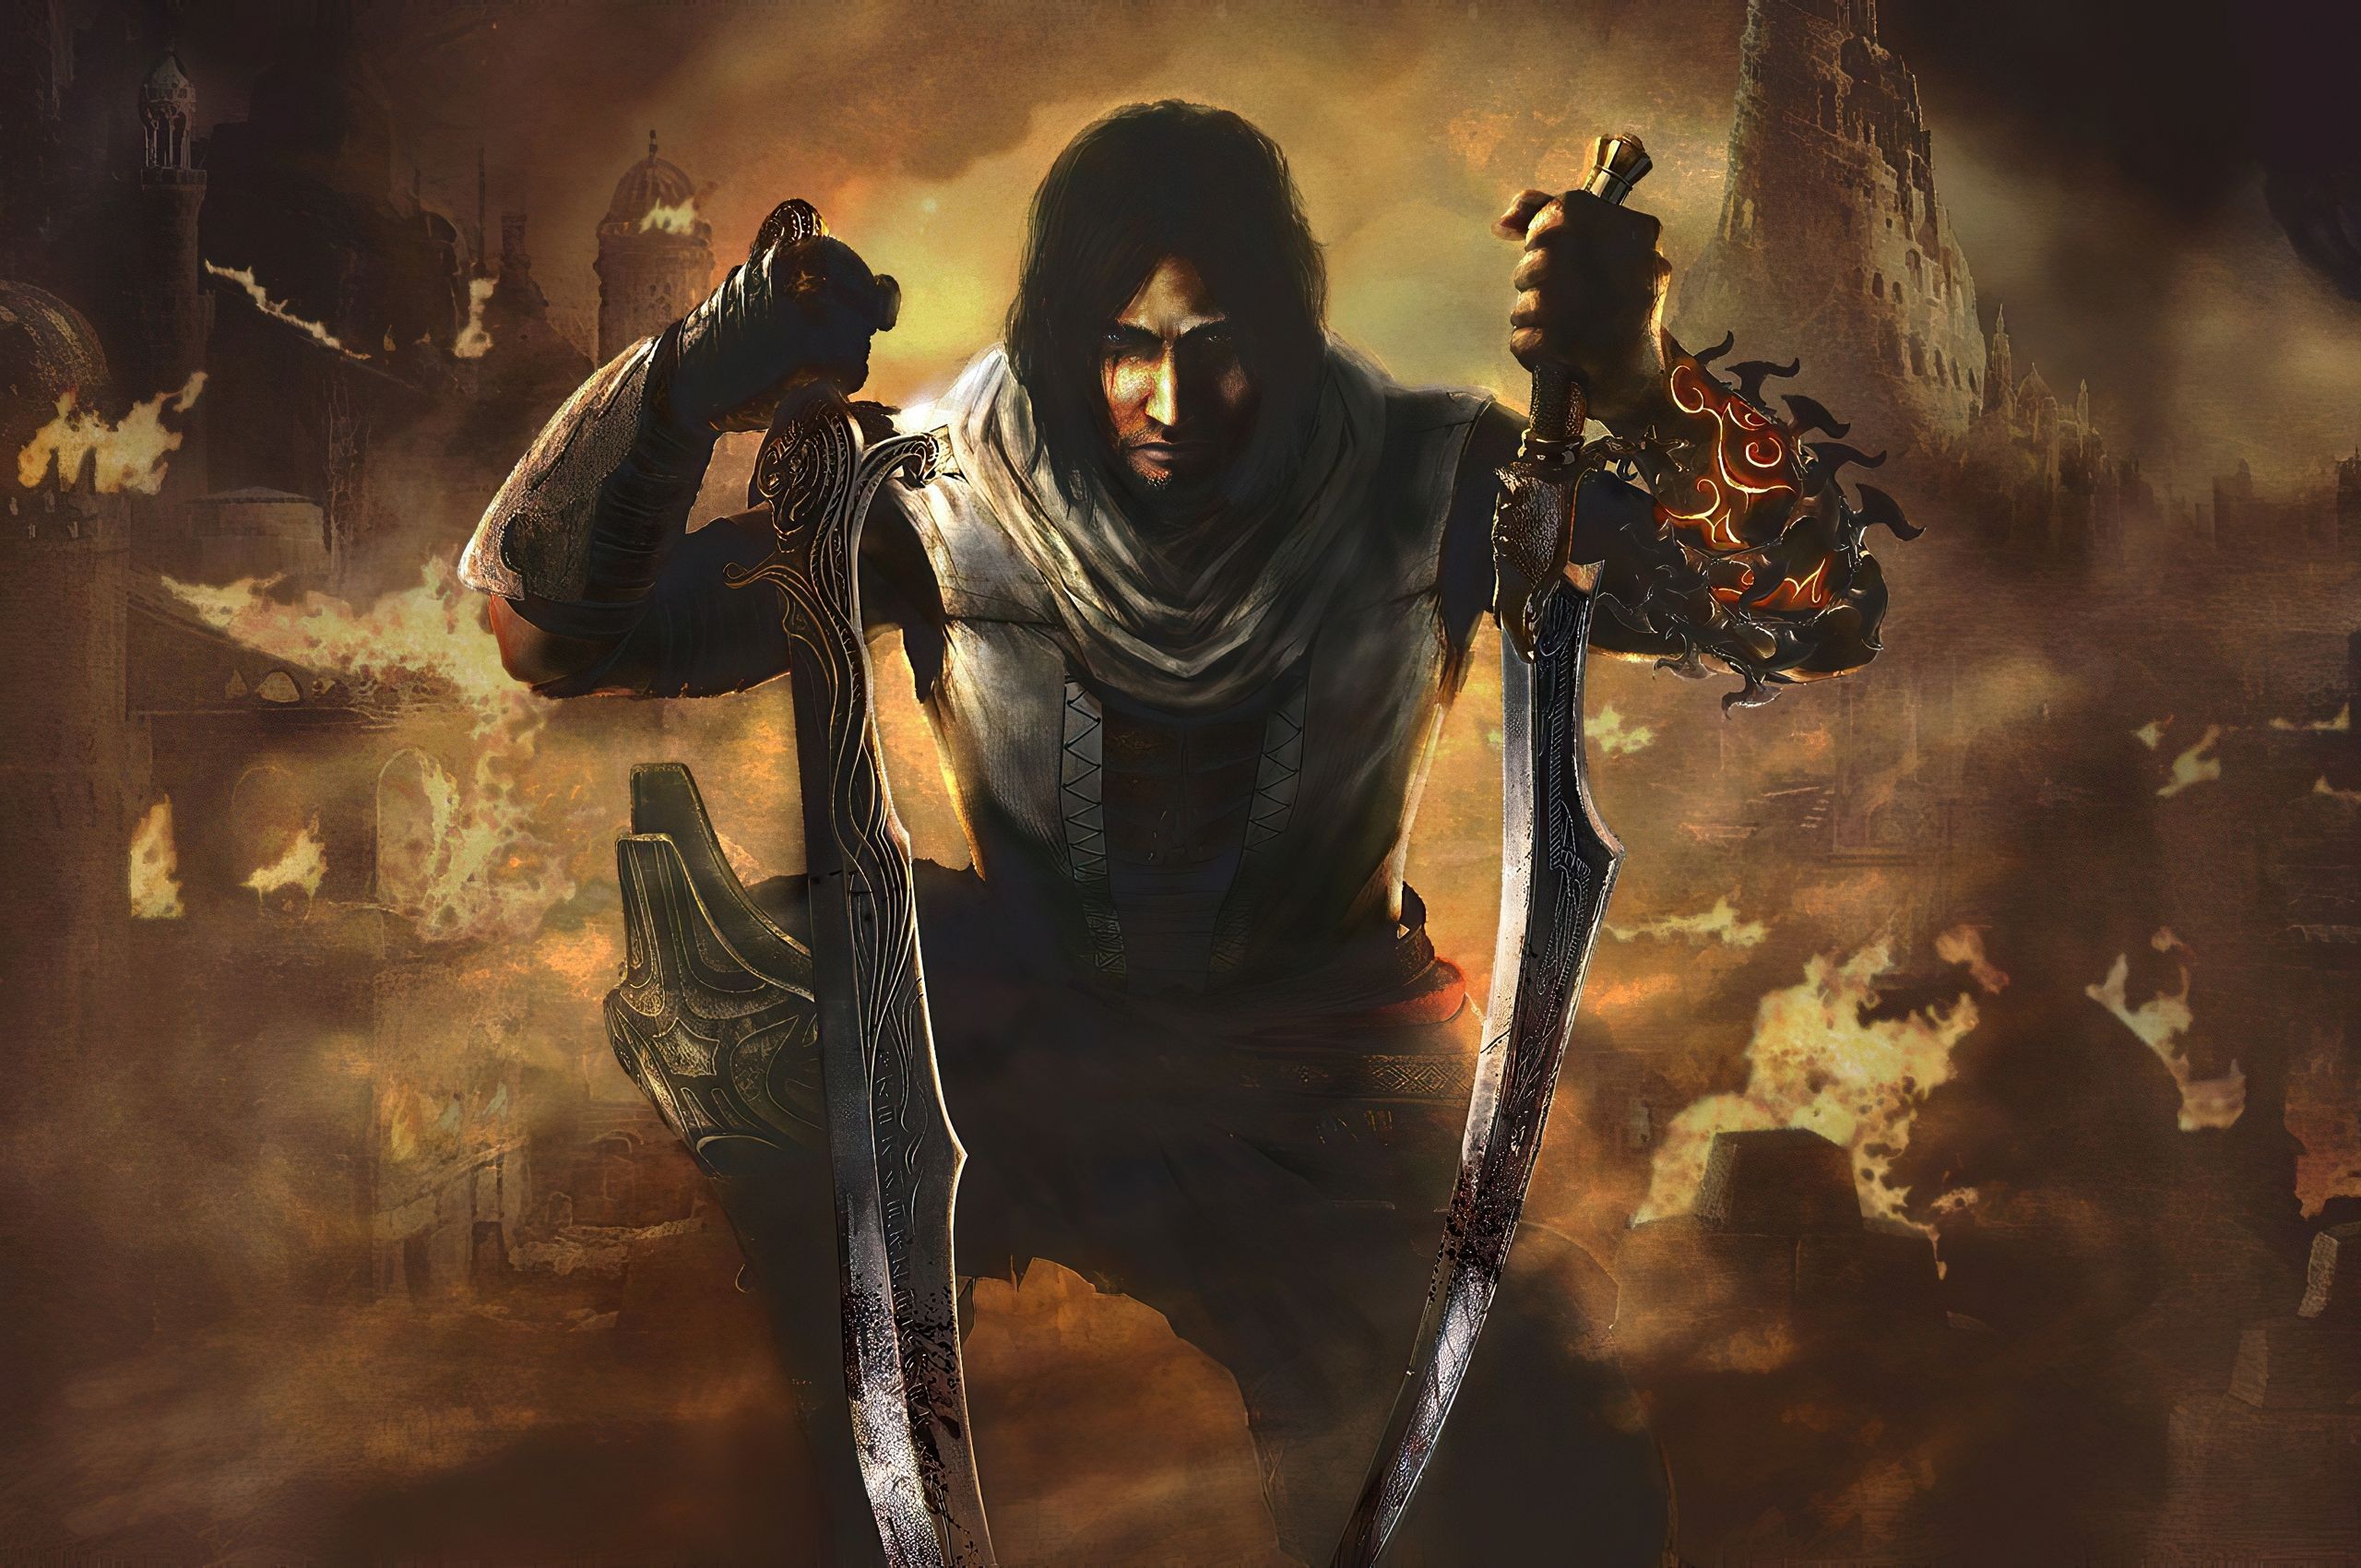 Prince Of Persia 2020 Chromebook Pixel HD 4k Wallpaper, Image, Background, Photo and Picture